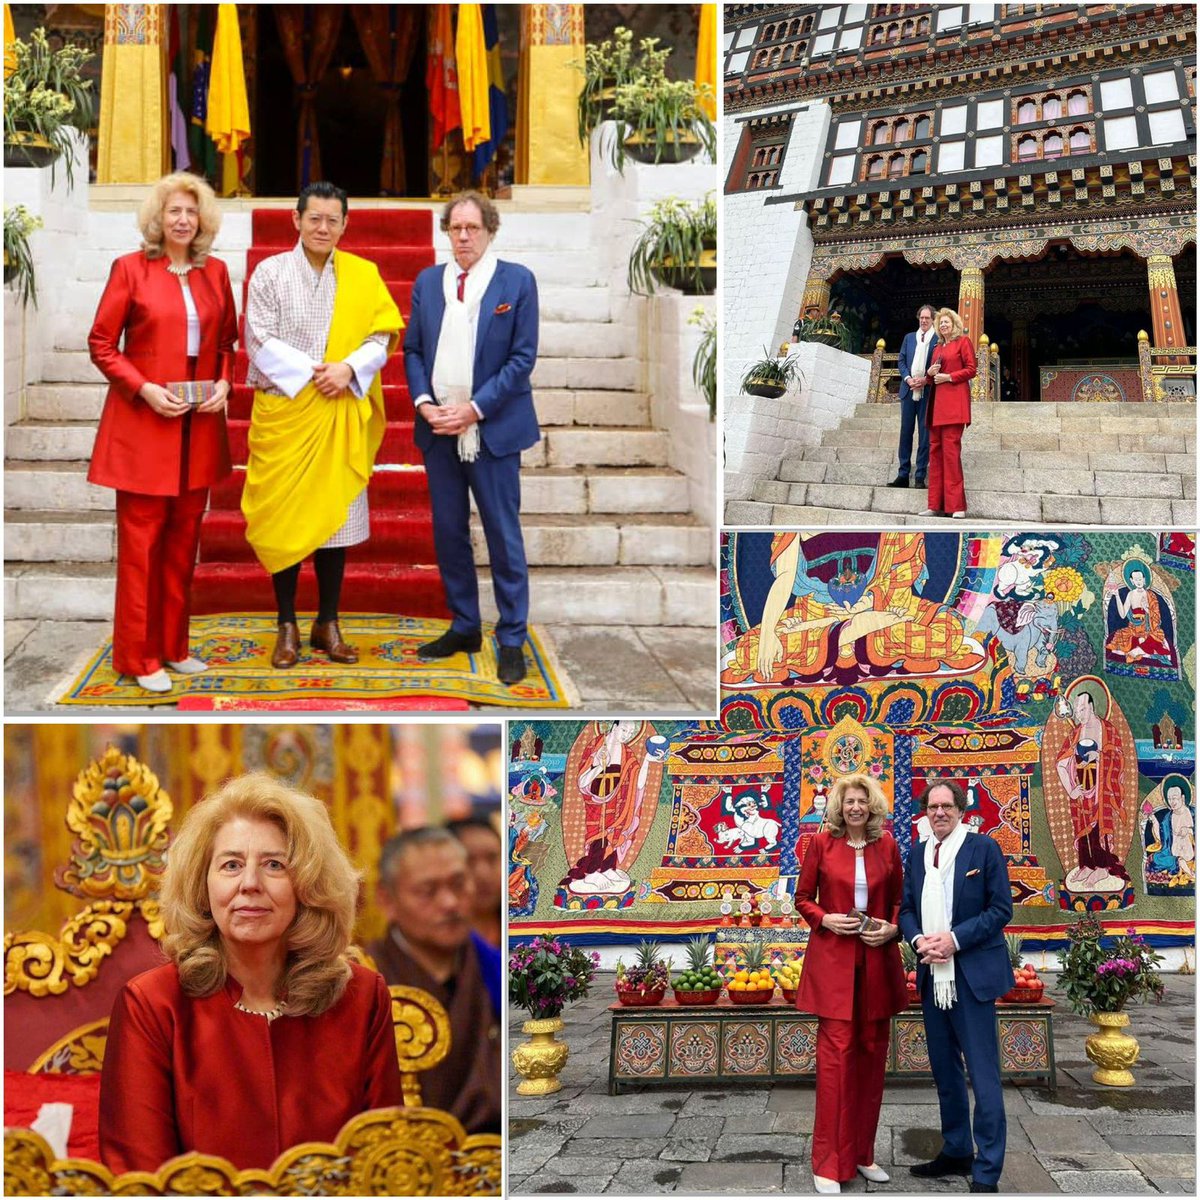 In a beautiful ceremony 🇳🇱 Ambassador @marisagerards presented credentials to His Majesty Jigme Khesar Namgyel Wangchuck, the King of Bhutan 🇧🇹